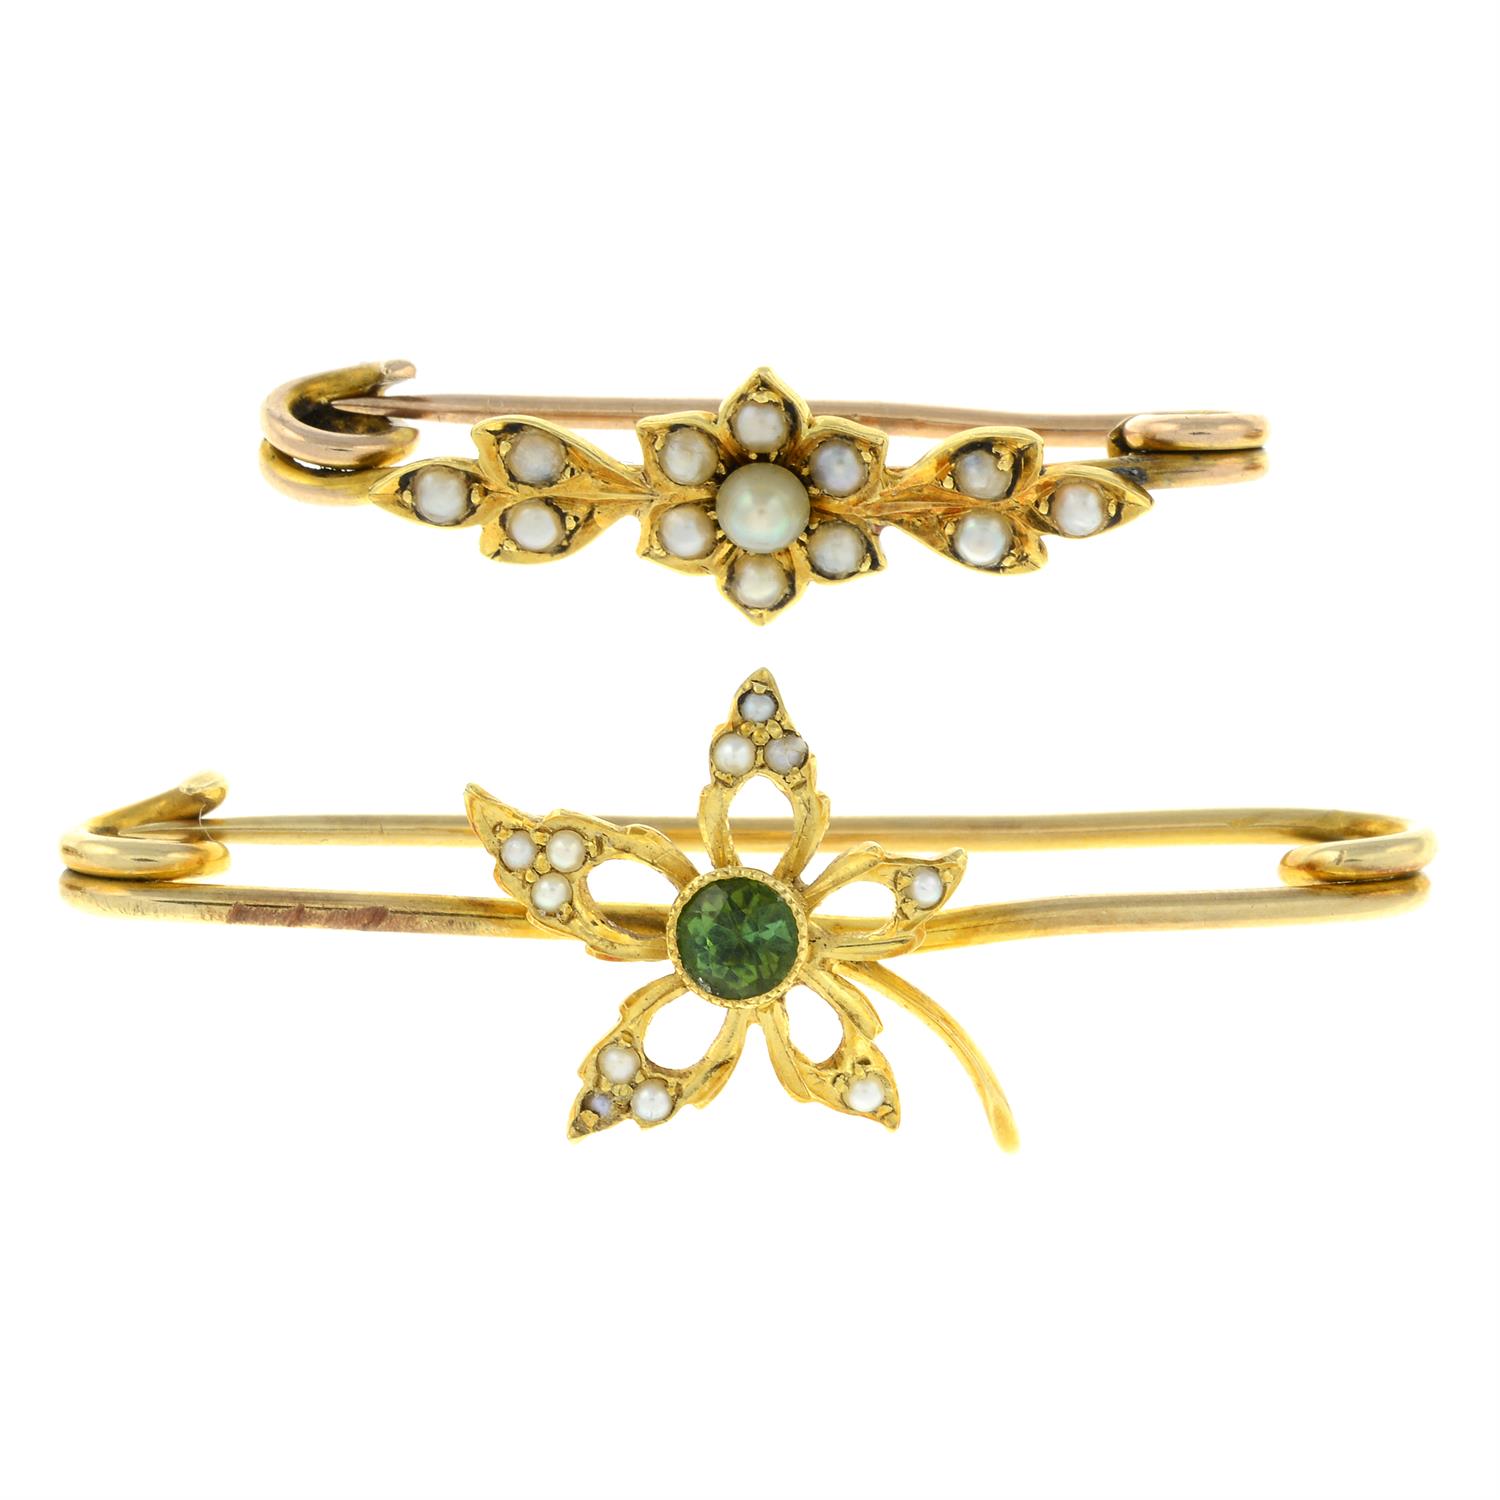 Two early 20th century gem-set bar brooches.